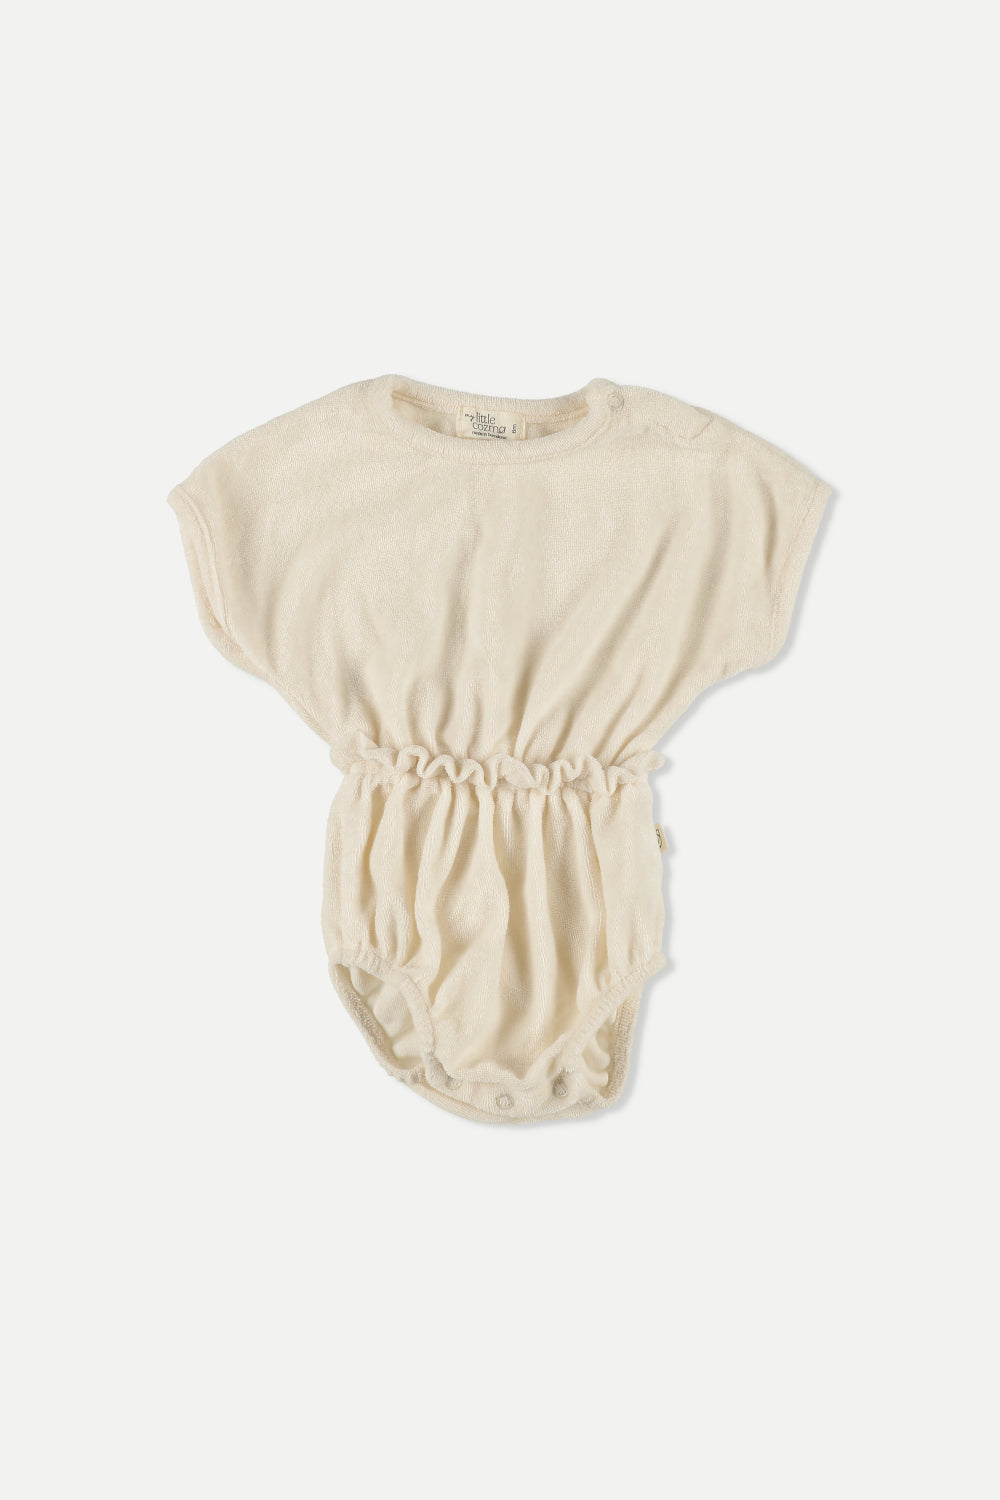 My Little Cozmo Ivory Terry Gianna Romper – Panda and Cub